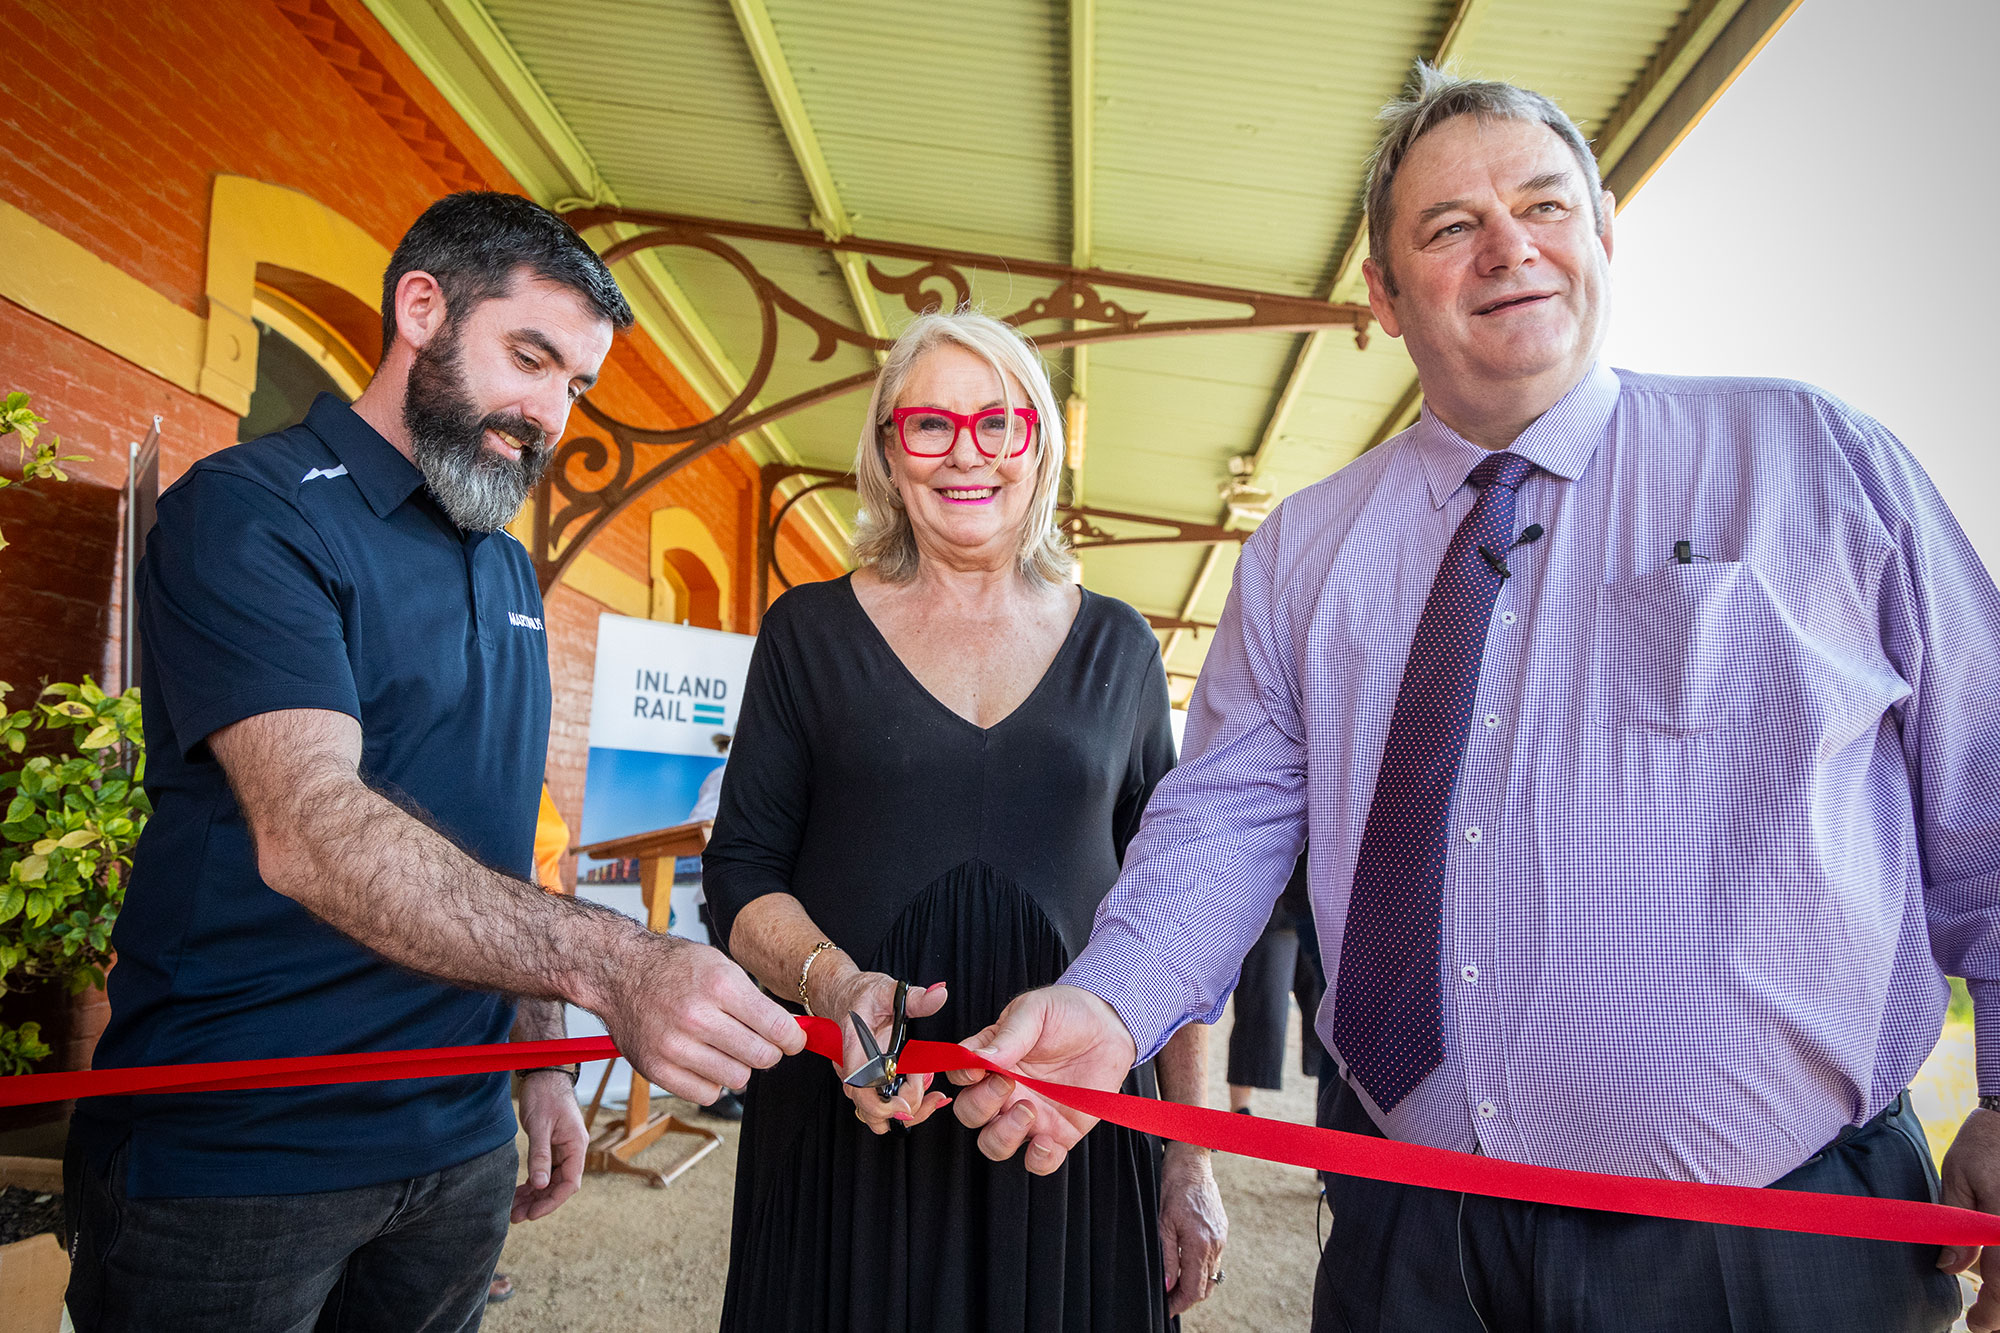 Gavin Murphy (Martinus Project Director), Cr Phyllis Miller OAM (Mayor of Forbes), Melvyn Maylin (Inland Rail Director Program Delivery, Albury to Parkes)